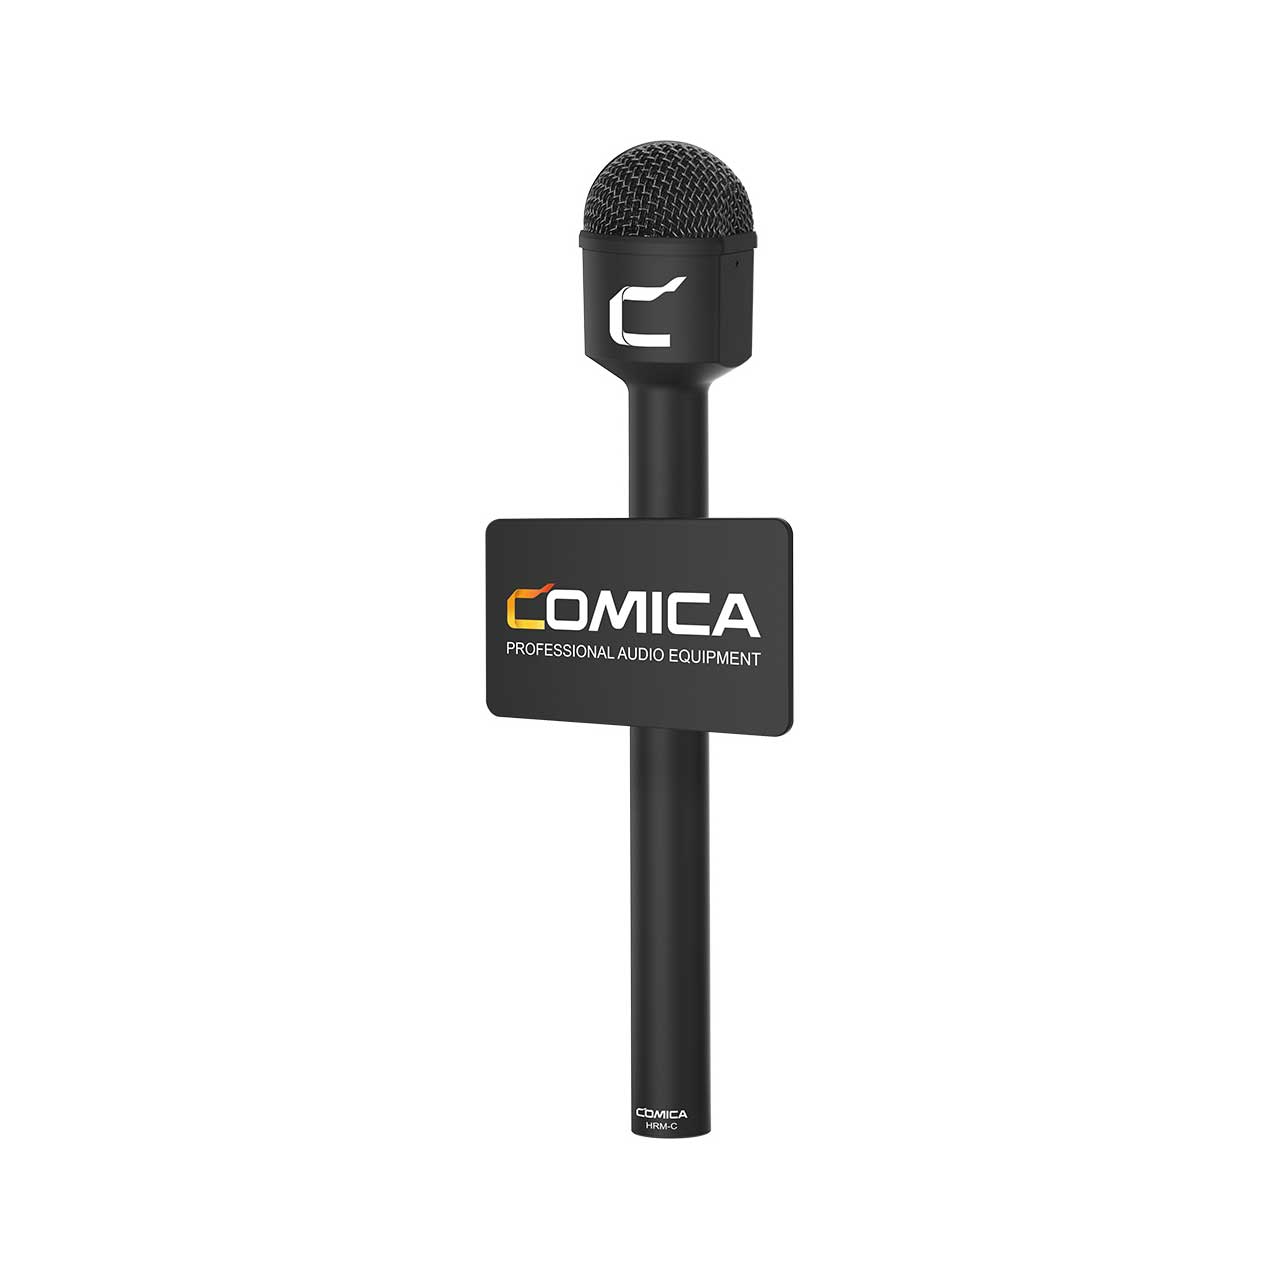 COMICA - hrm-s reporter / interview microphone